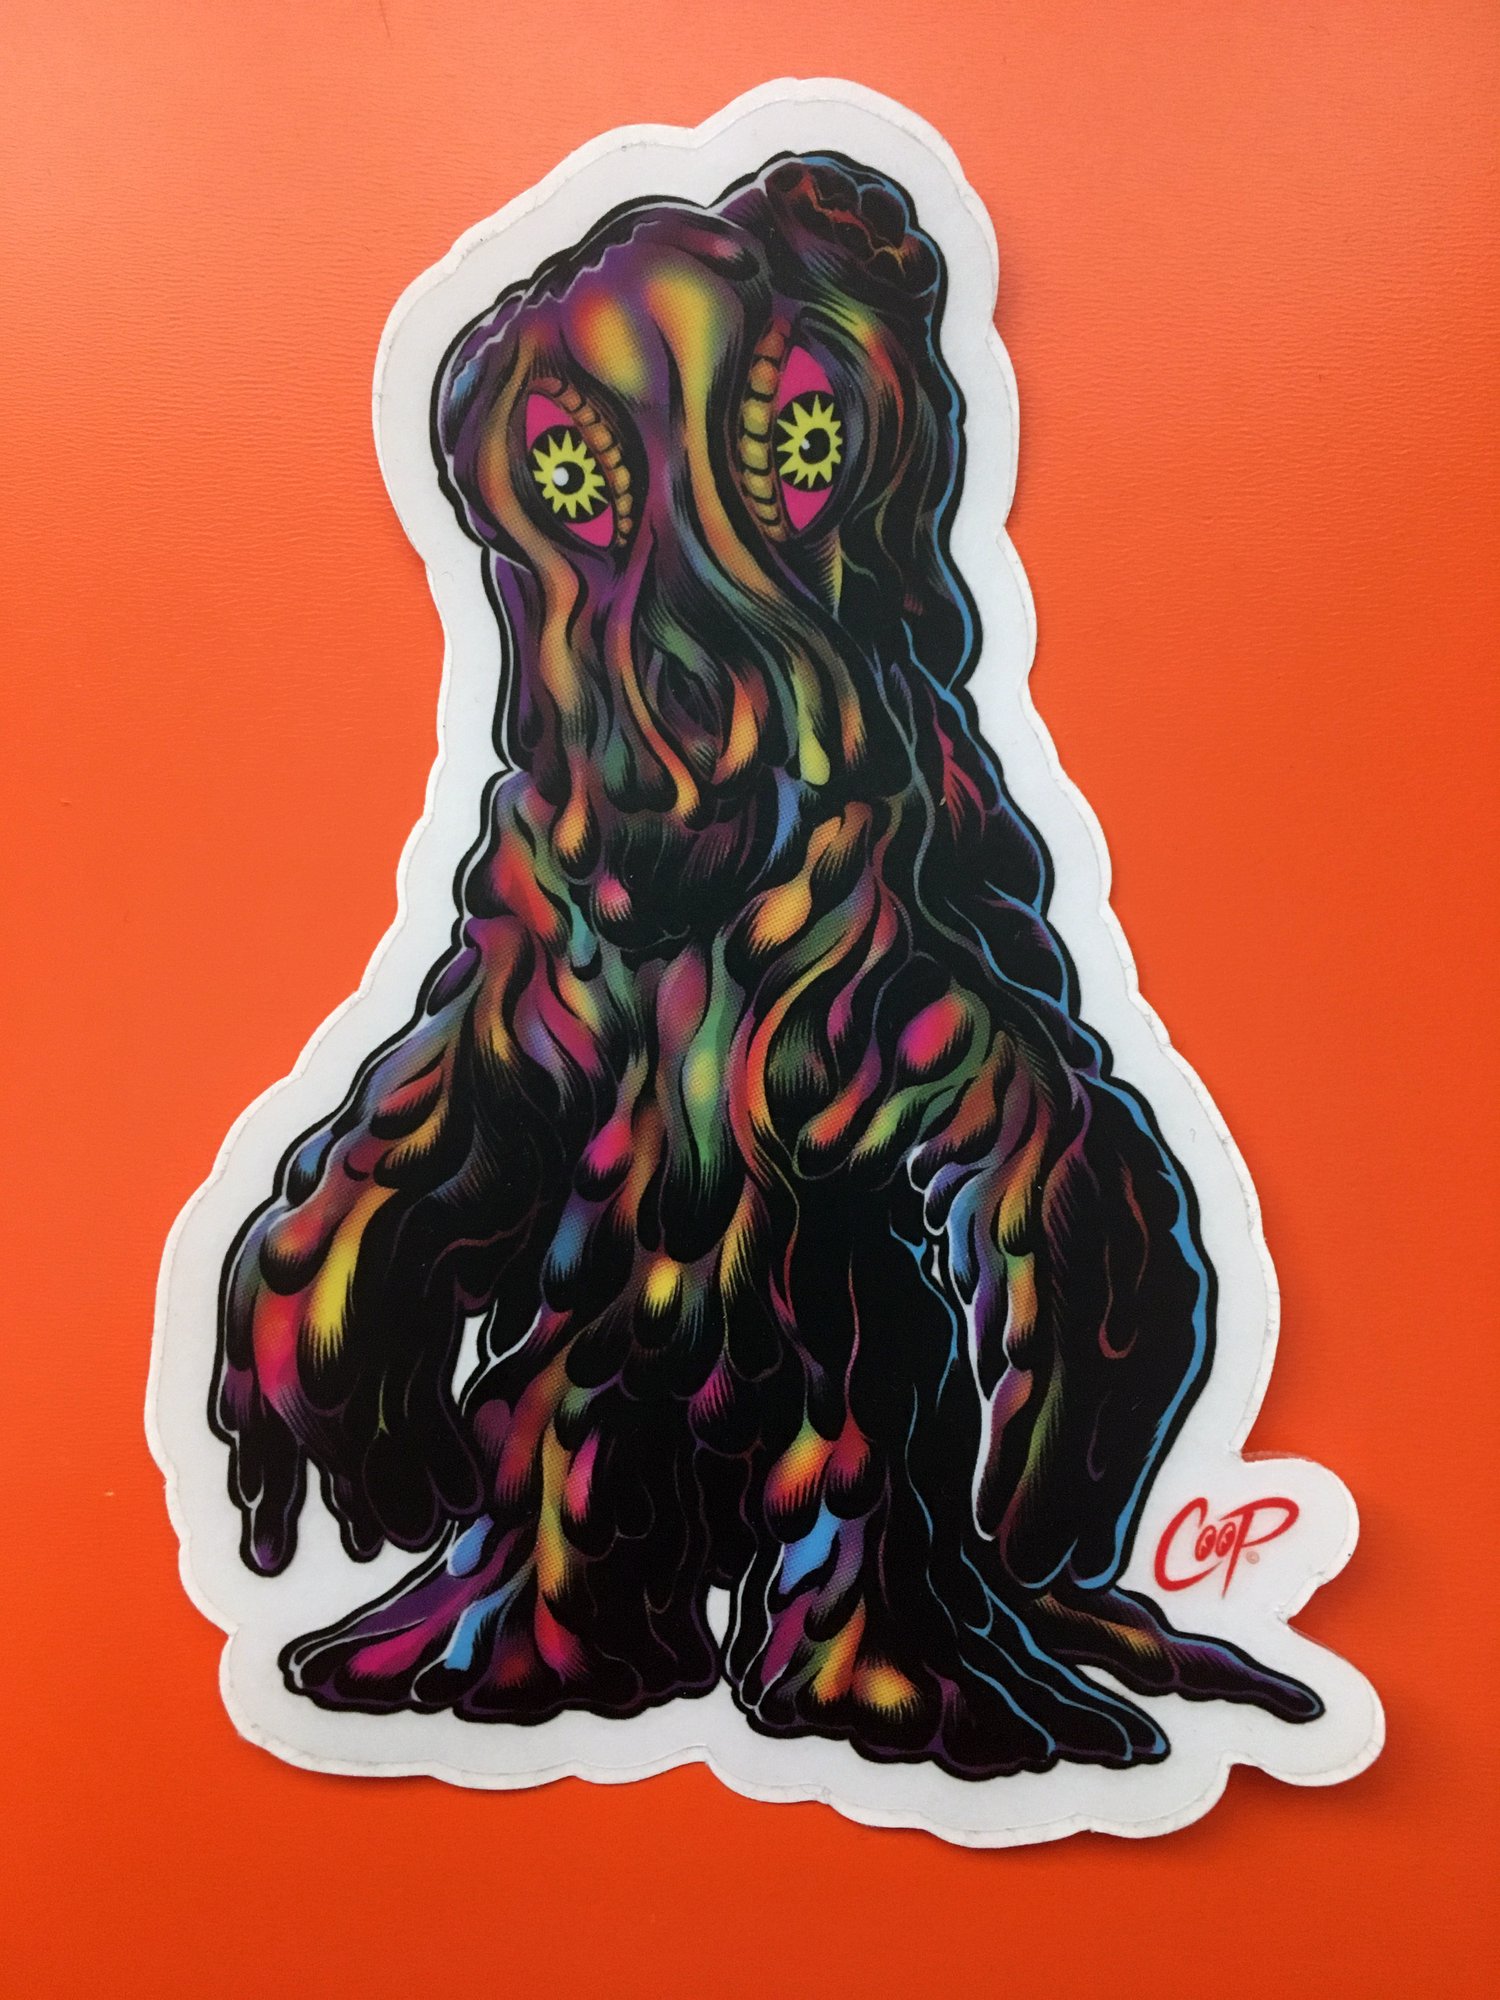 Image of COOP Sticker Pack #8 "Scary Monsters & Super Creeps"